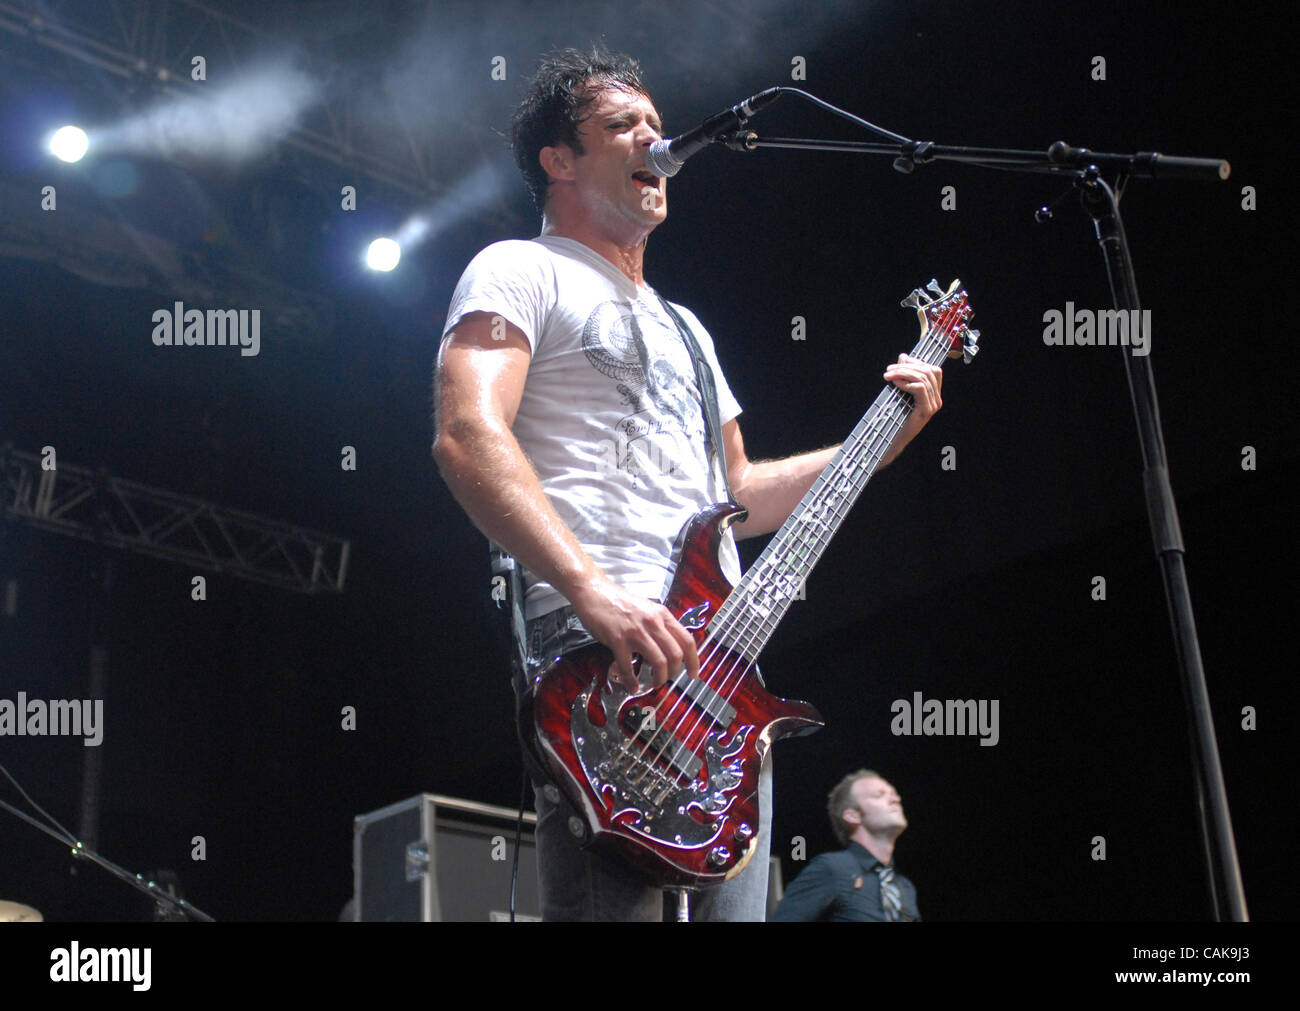 Sep. 26, 2007 Raleigh, NC; USA, Singer / Bass Guitarist JOHN COOPER of the  band Skillet performs live as there 2007 tour makes a stop at Walnut Creek  Amphitheater located in Raleigh.